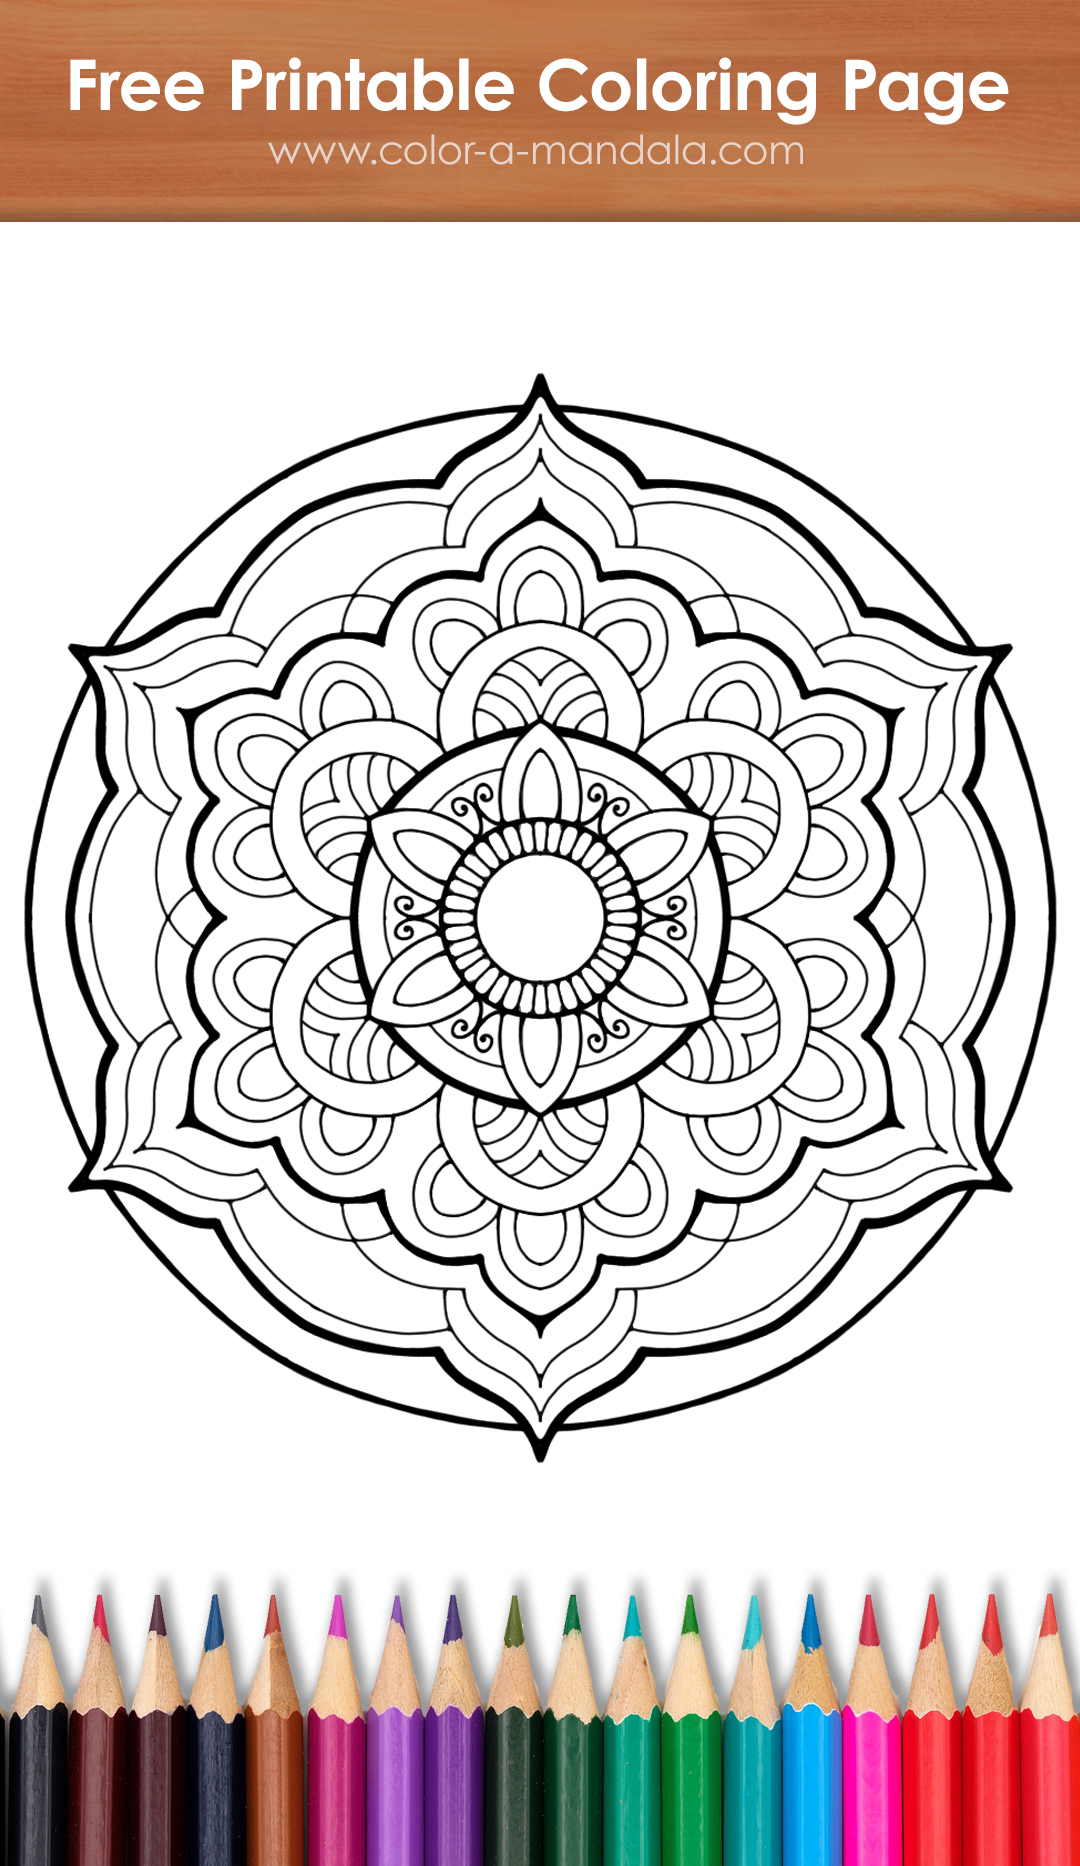 Image of coloring page with calm harmony mandala design.